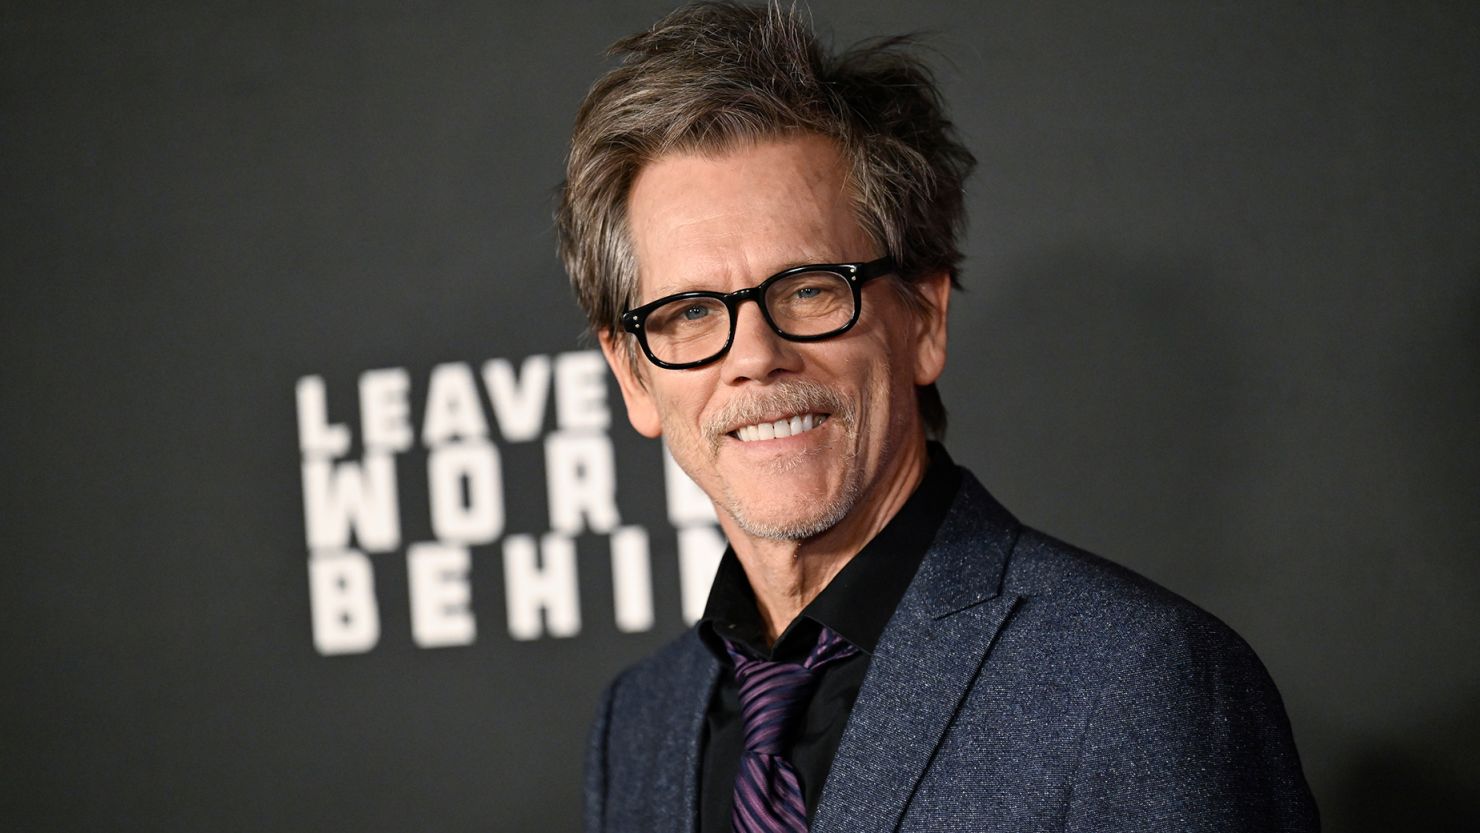 Actor Kevin Bacon, shown attending the premiere of Netflix's "Leave the World Behind," has inspired the name of a gene that influences social networks in fruit flies.